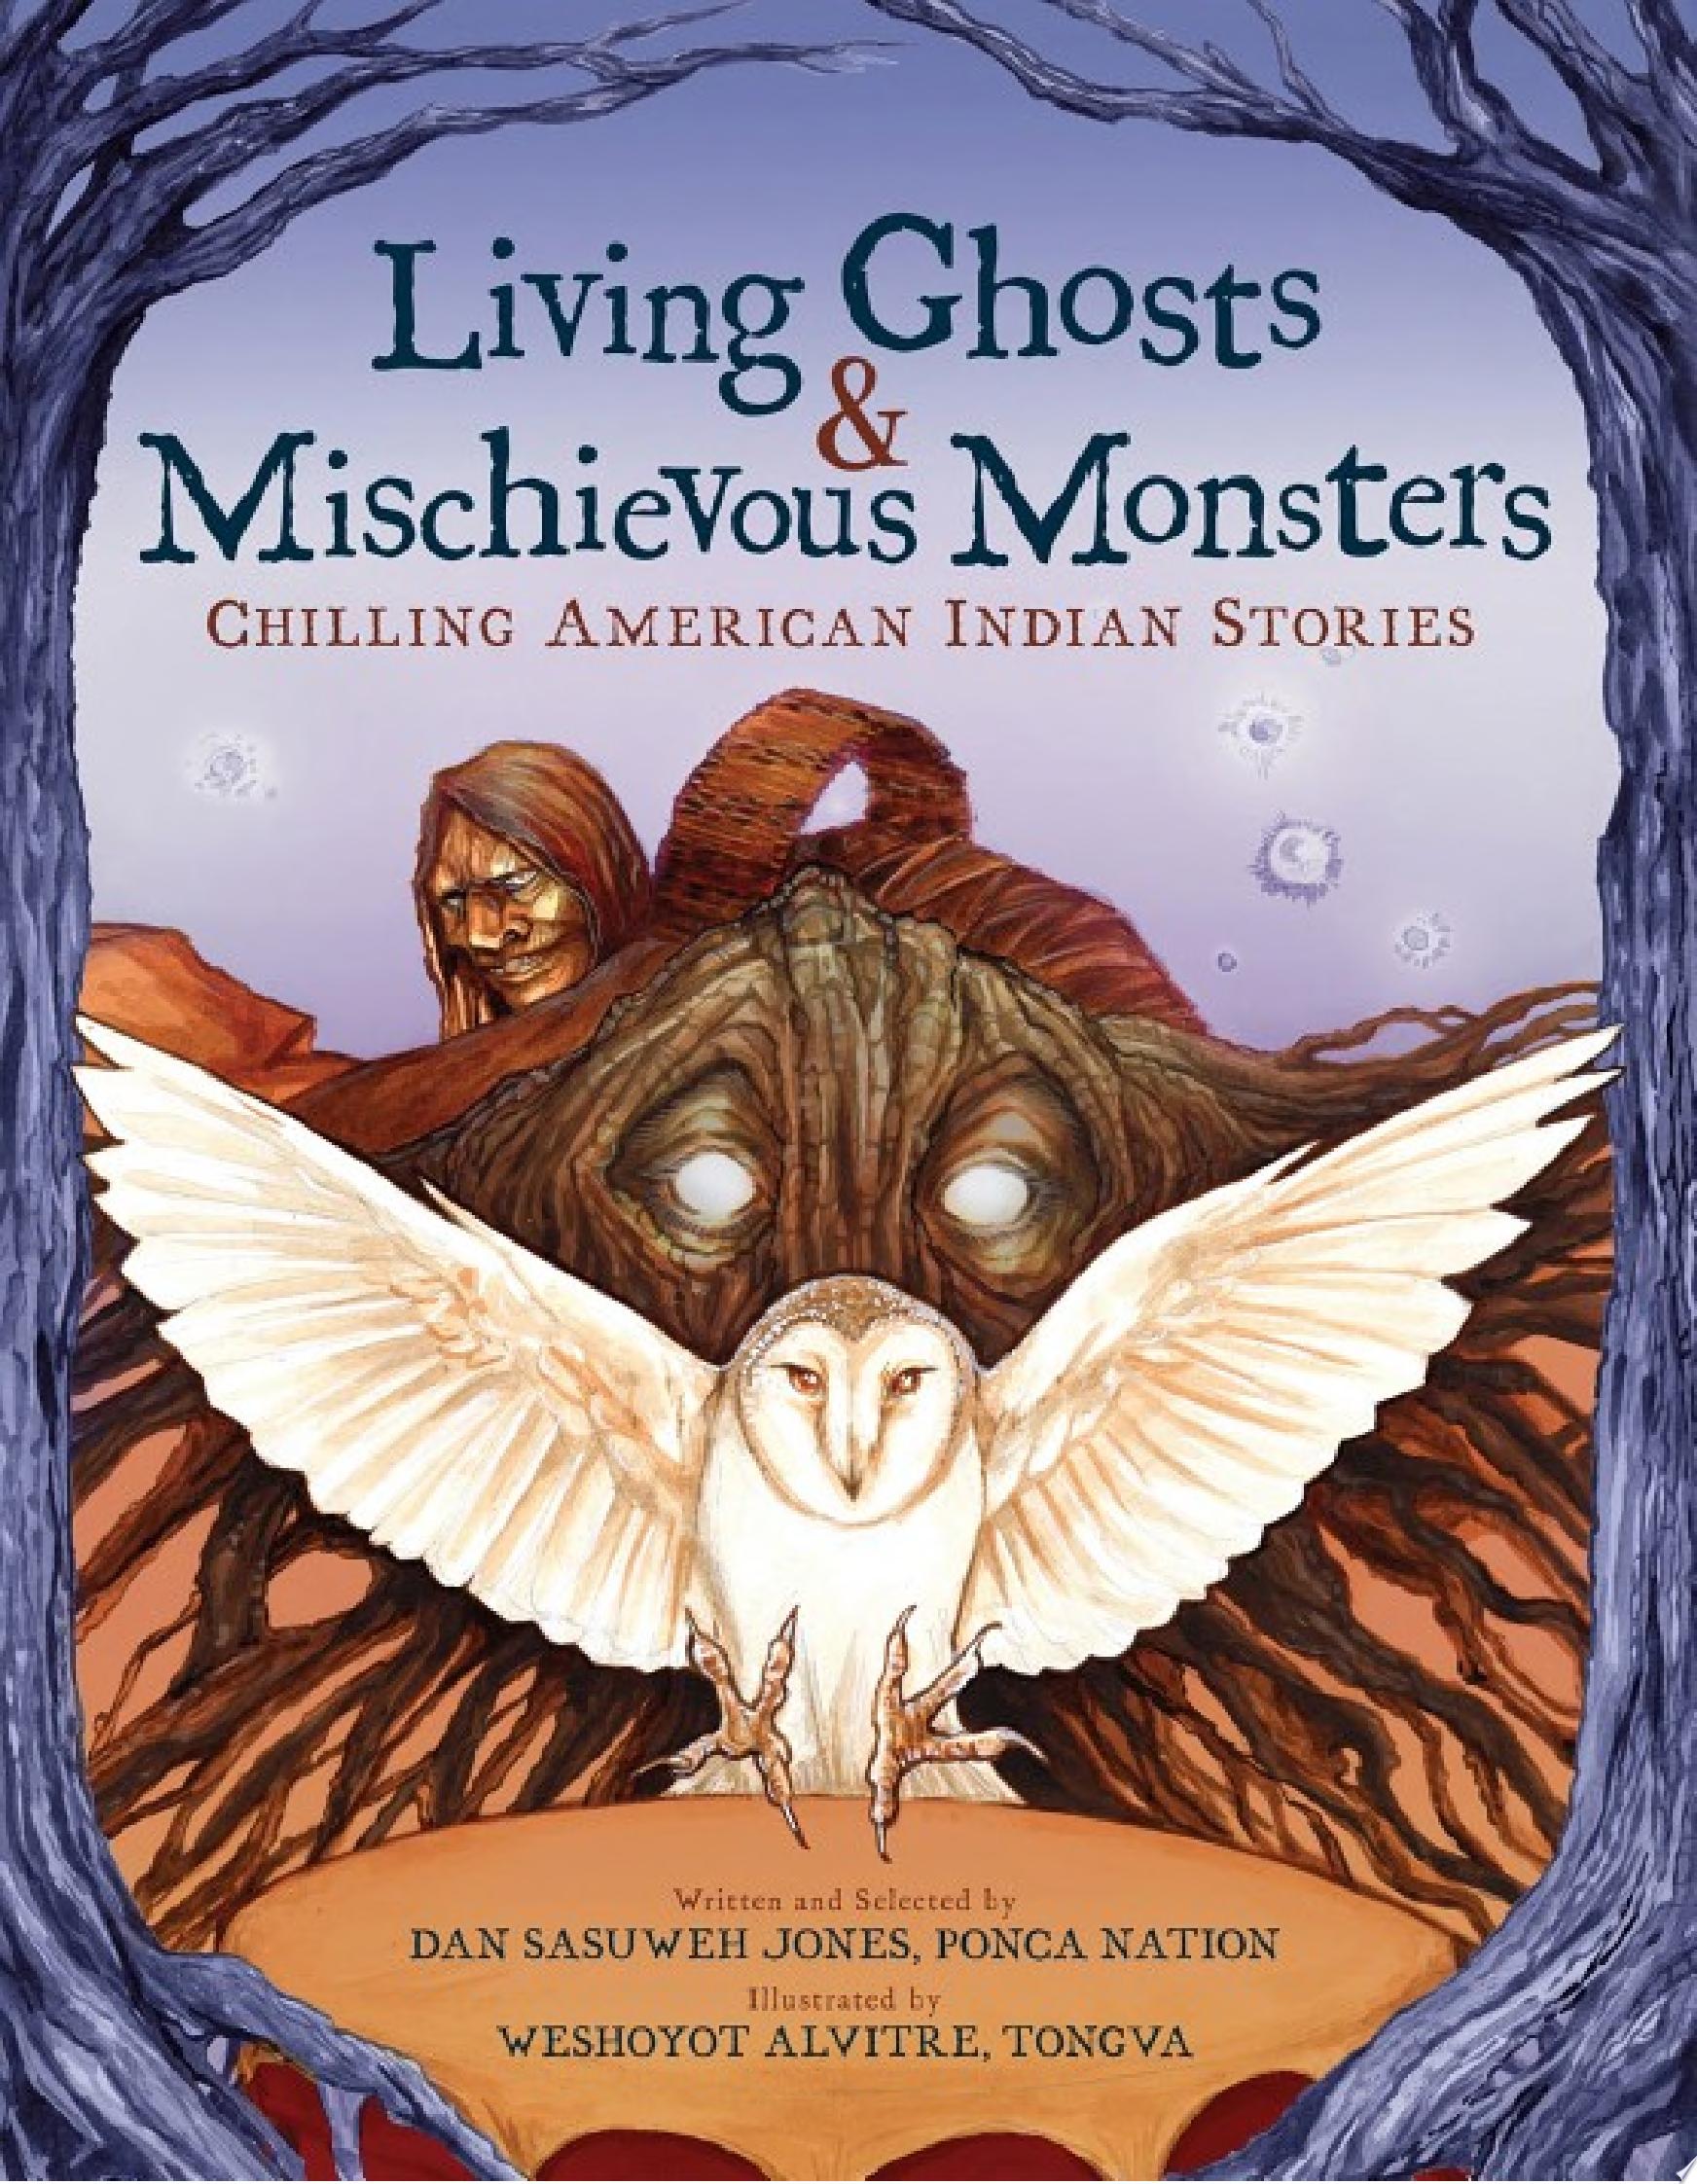 Image for "Living Ghosts and Mischievous Monsters"